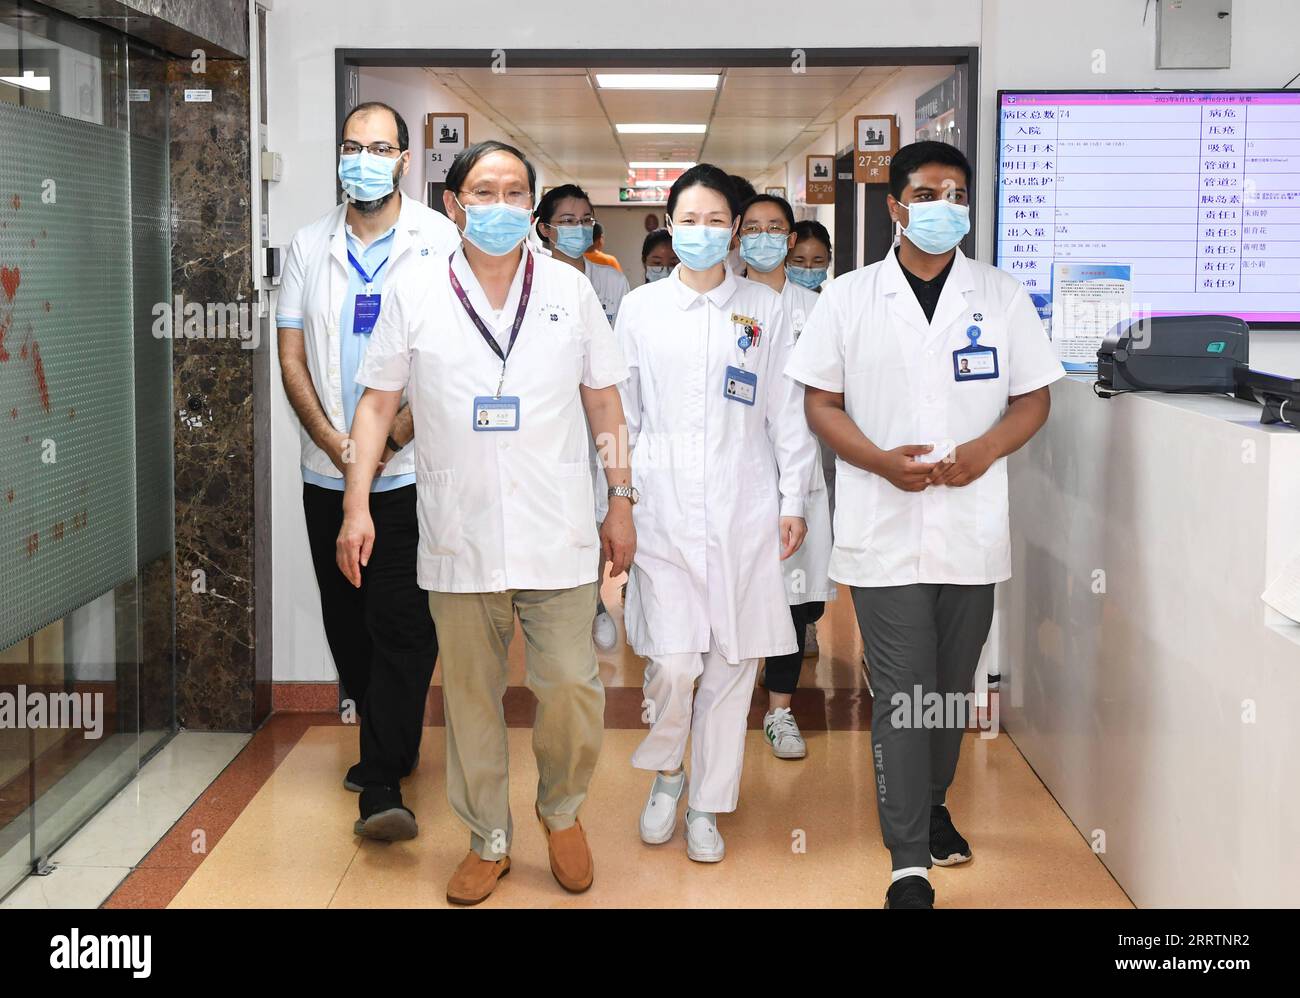 230803 -- NANJING, Aug. 3, 2023 -- Fan Zhining L front, expert of digestive endoscopy, visits the inpatient wards with foreign medical workers of a medical seminar at Jiangsu Province Hospital in Nanjing, capital of east China s Jiangsu Province, Aug. 1, 2023. In recent years, Jiangsu Province Hospital cooperated with medical institutions in Pakistan, Egypt and other countries and regions in the field of digestive endoscopy to promote medical cooperation under the Belt and Road Initiative.  CHINA-JIANGSU-DIGESTIVE ENDOSCOPY-INTERNATIONAL COOPERATION CN JixChunpeng PUBLICATIONxNOTxINxCHN Stock Photo